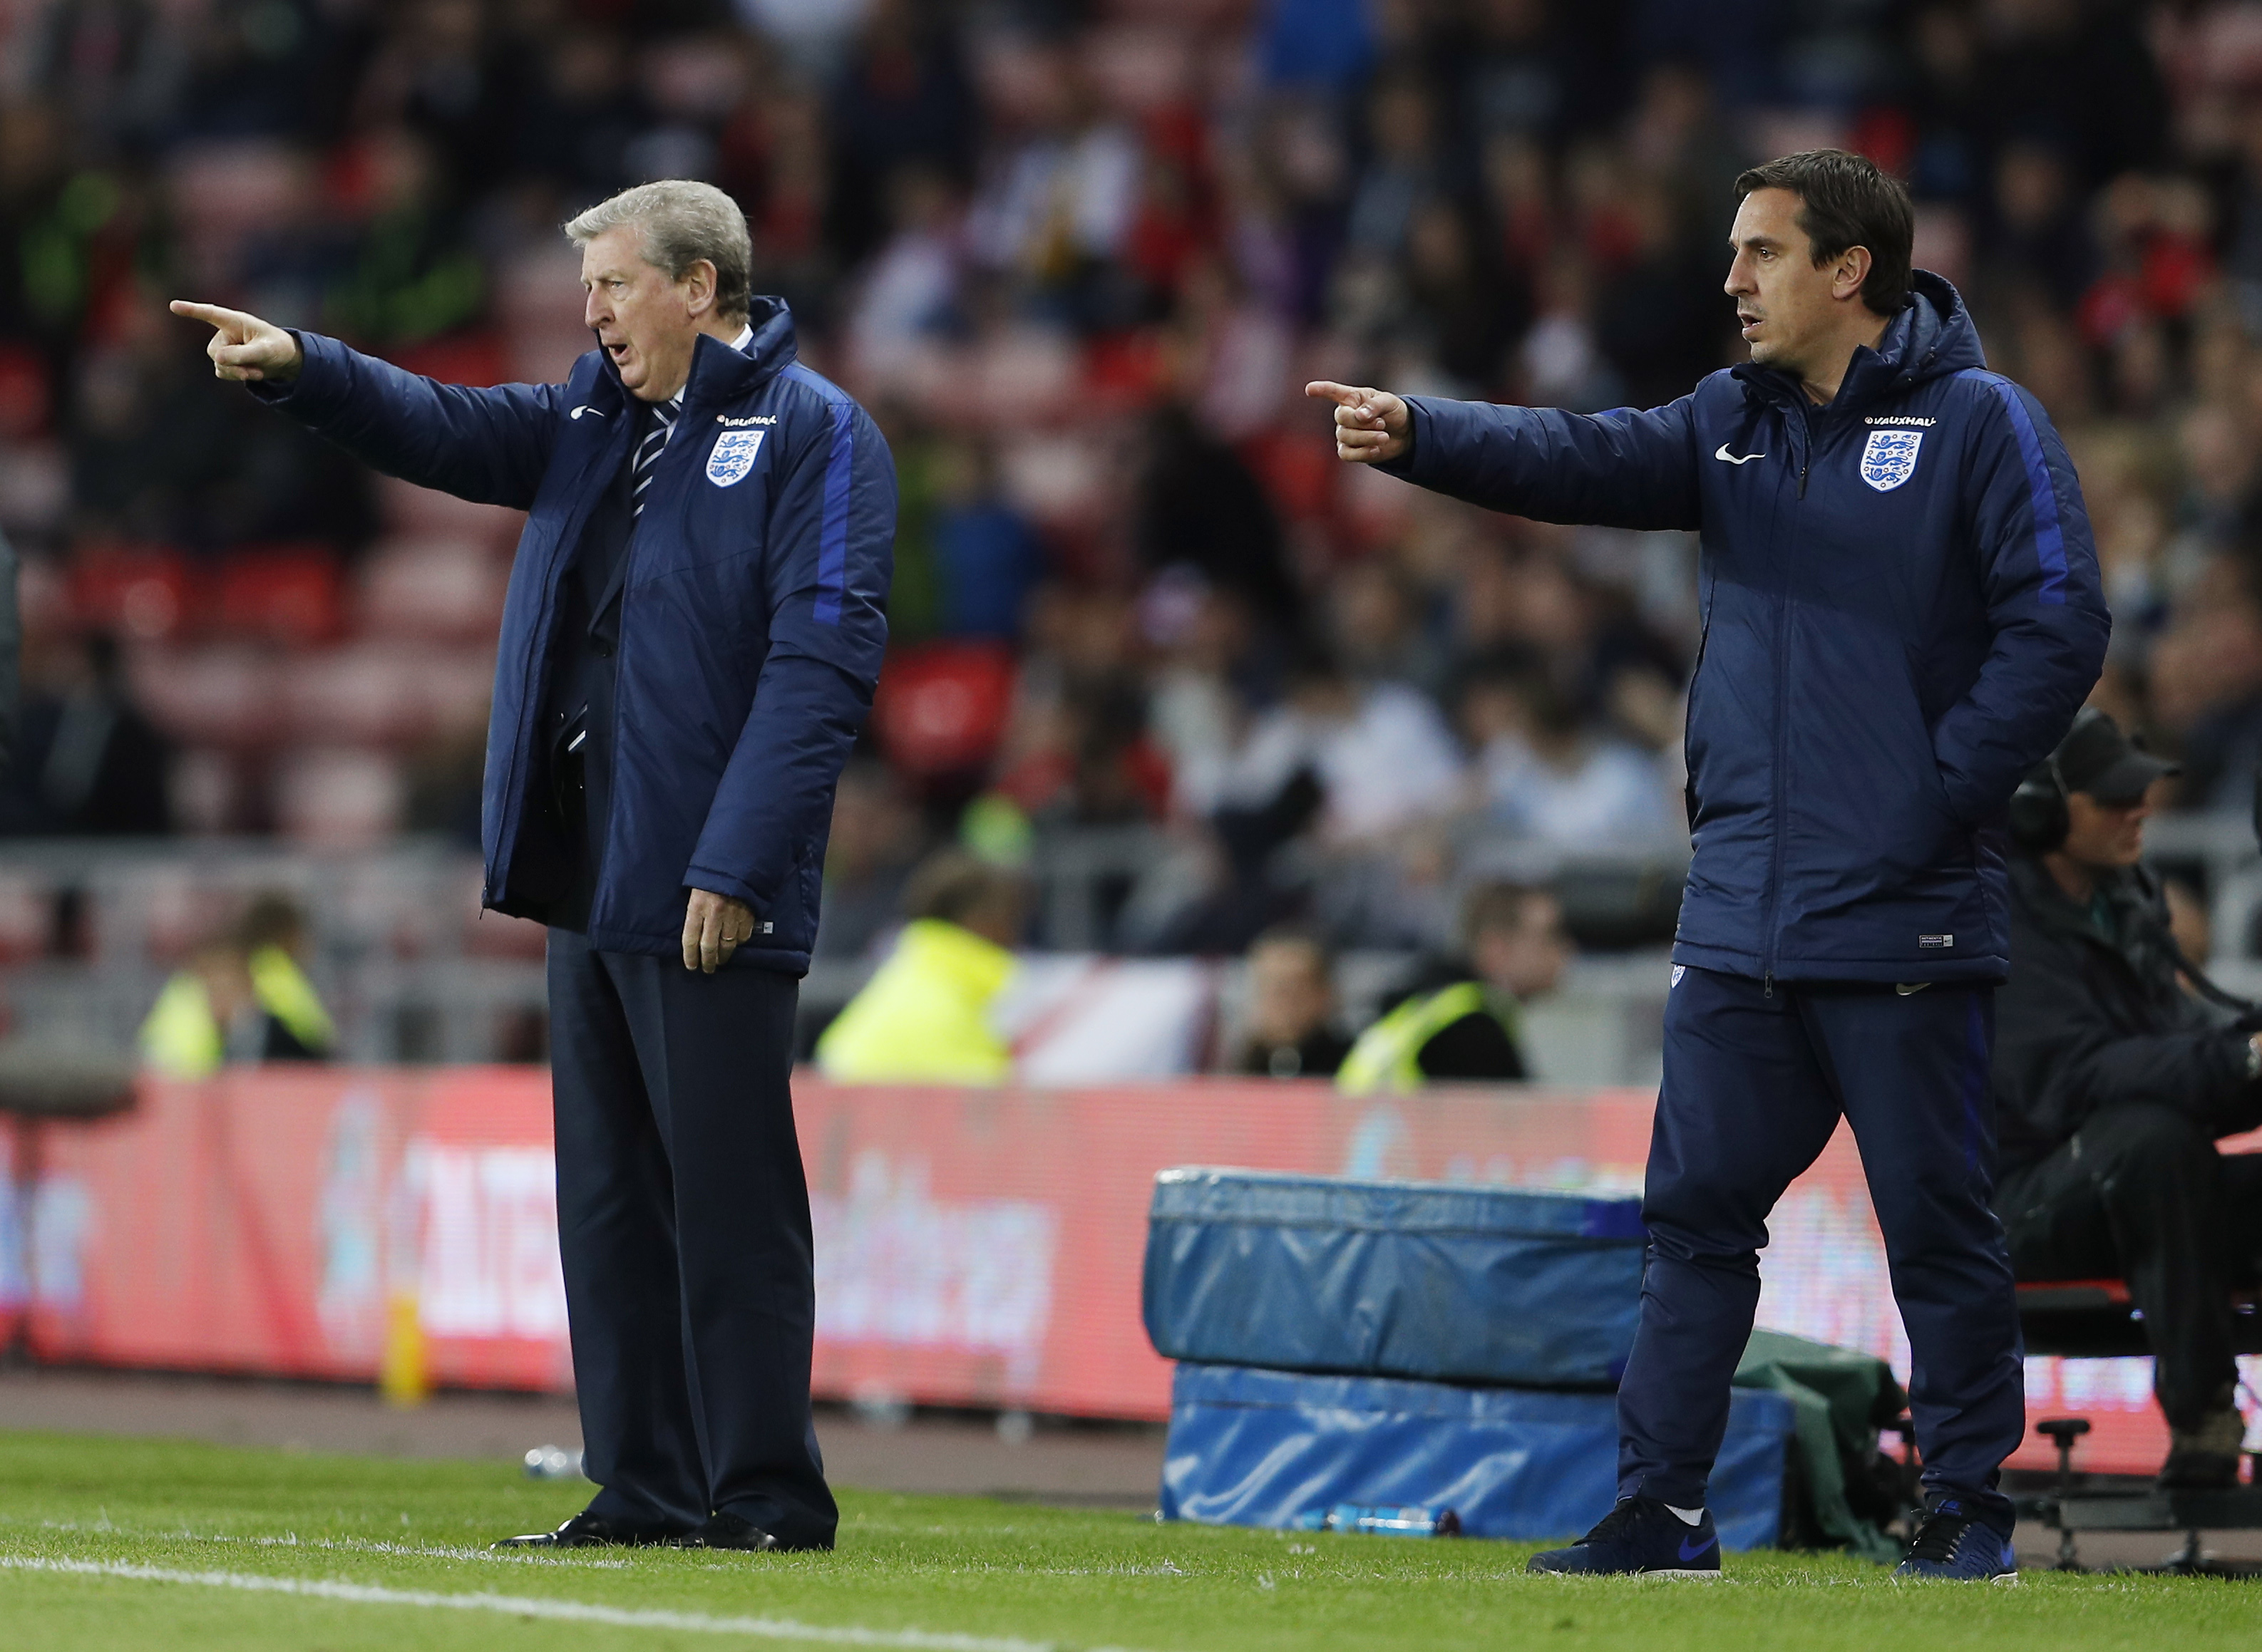 Britain Football Soccer - England v Australia - International Friendly - Stadium of Light, Sunderland - 27/5/16 England manager Roy Hodgson and assistant Gary Neville (R) Action Images via Reuters / Lee Smith Livepic EDITORIAL USE ONLY.